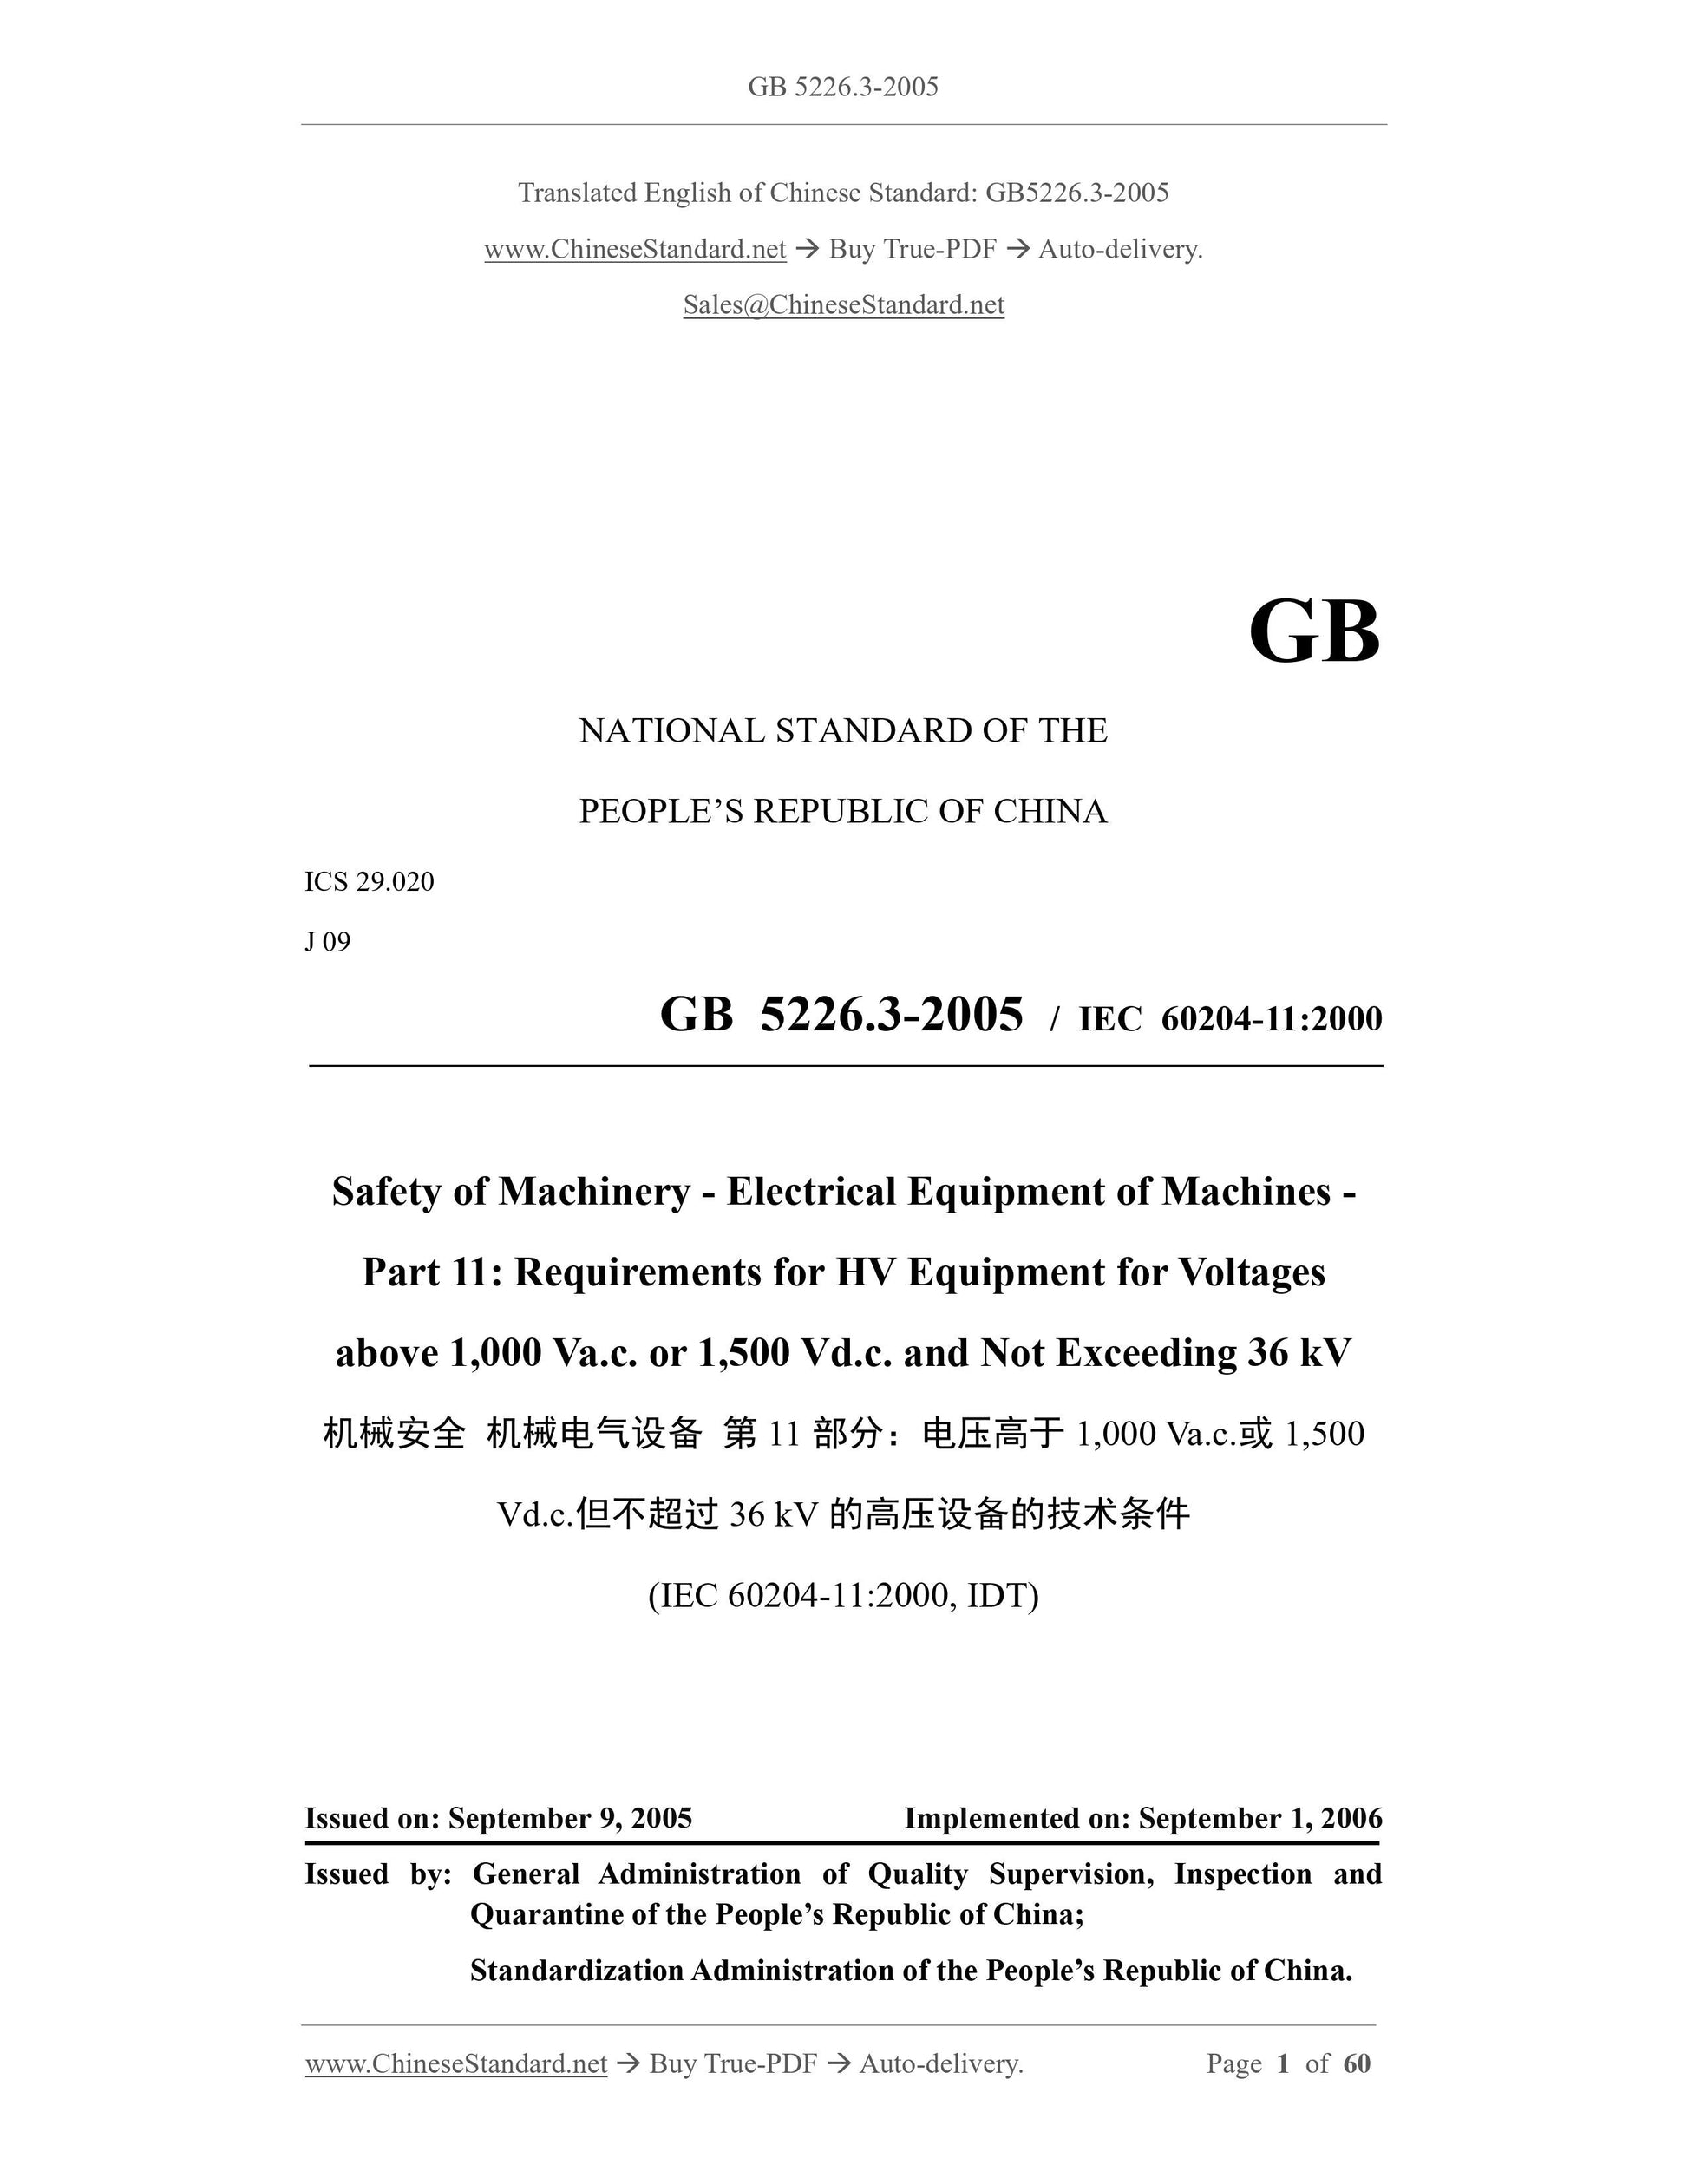 GB 5226.3-2005 Page 1